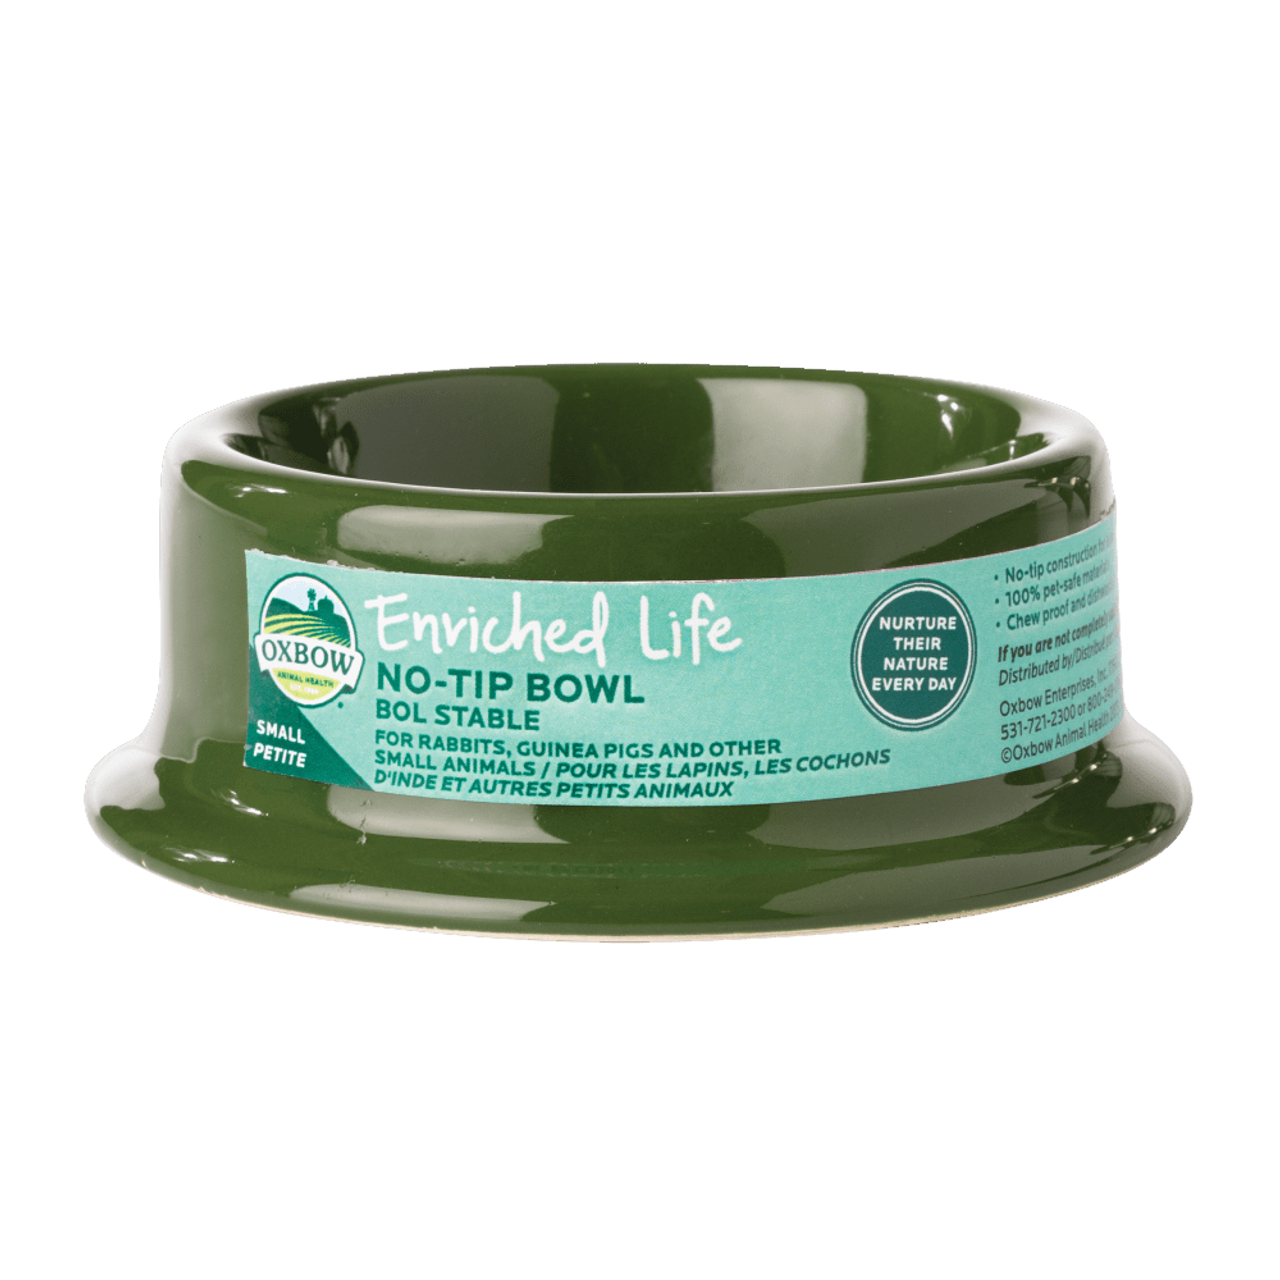 Oxbow® Enriched Life No-Tip Small Animal Bowl Small Size